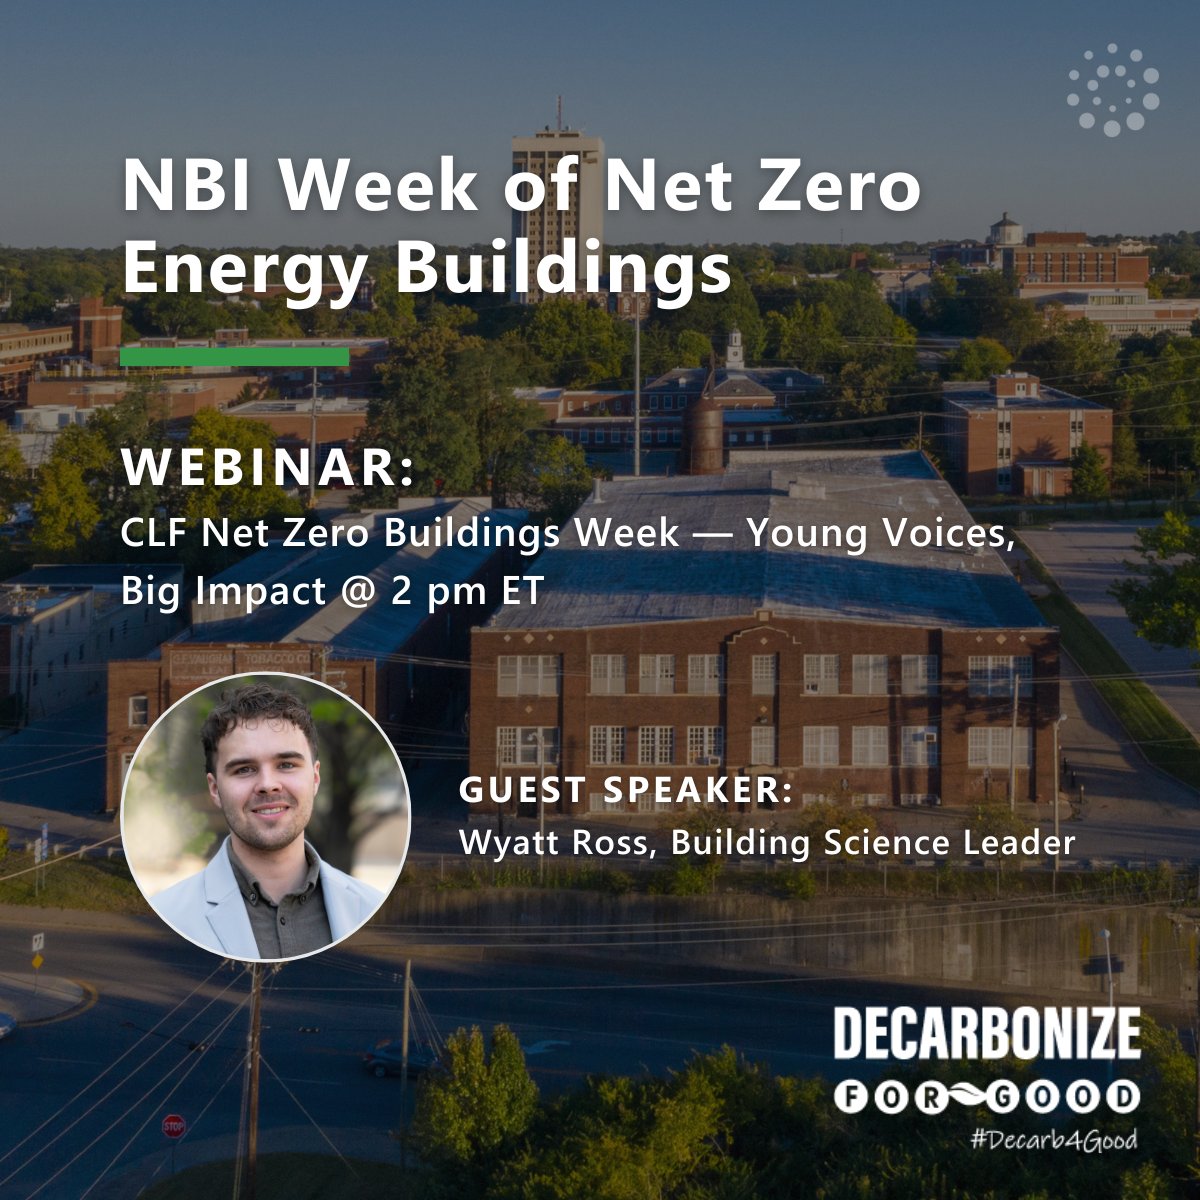 Don’t miss CMTA’s Wyatt Ross speaking during today's #Decarb4Good webinar as part of @NewBldgsInst's #NetZero Buildings Week. At 2pm ET, he will discuss the #EmbodiedCarbon strategy at the @universityofky College of Design’s historical renovation project. bit.ly/43YRRA9